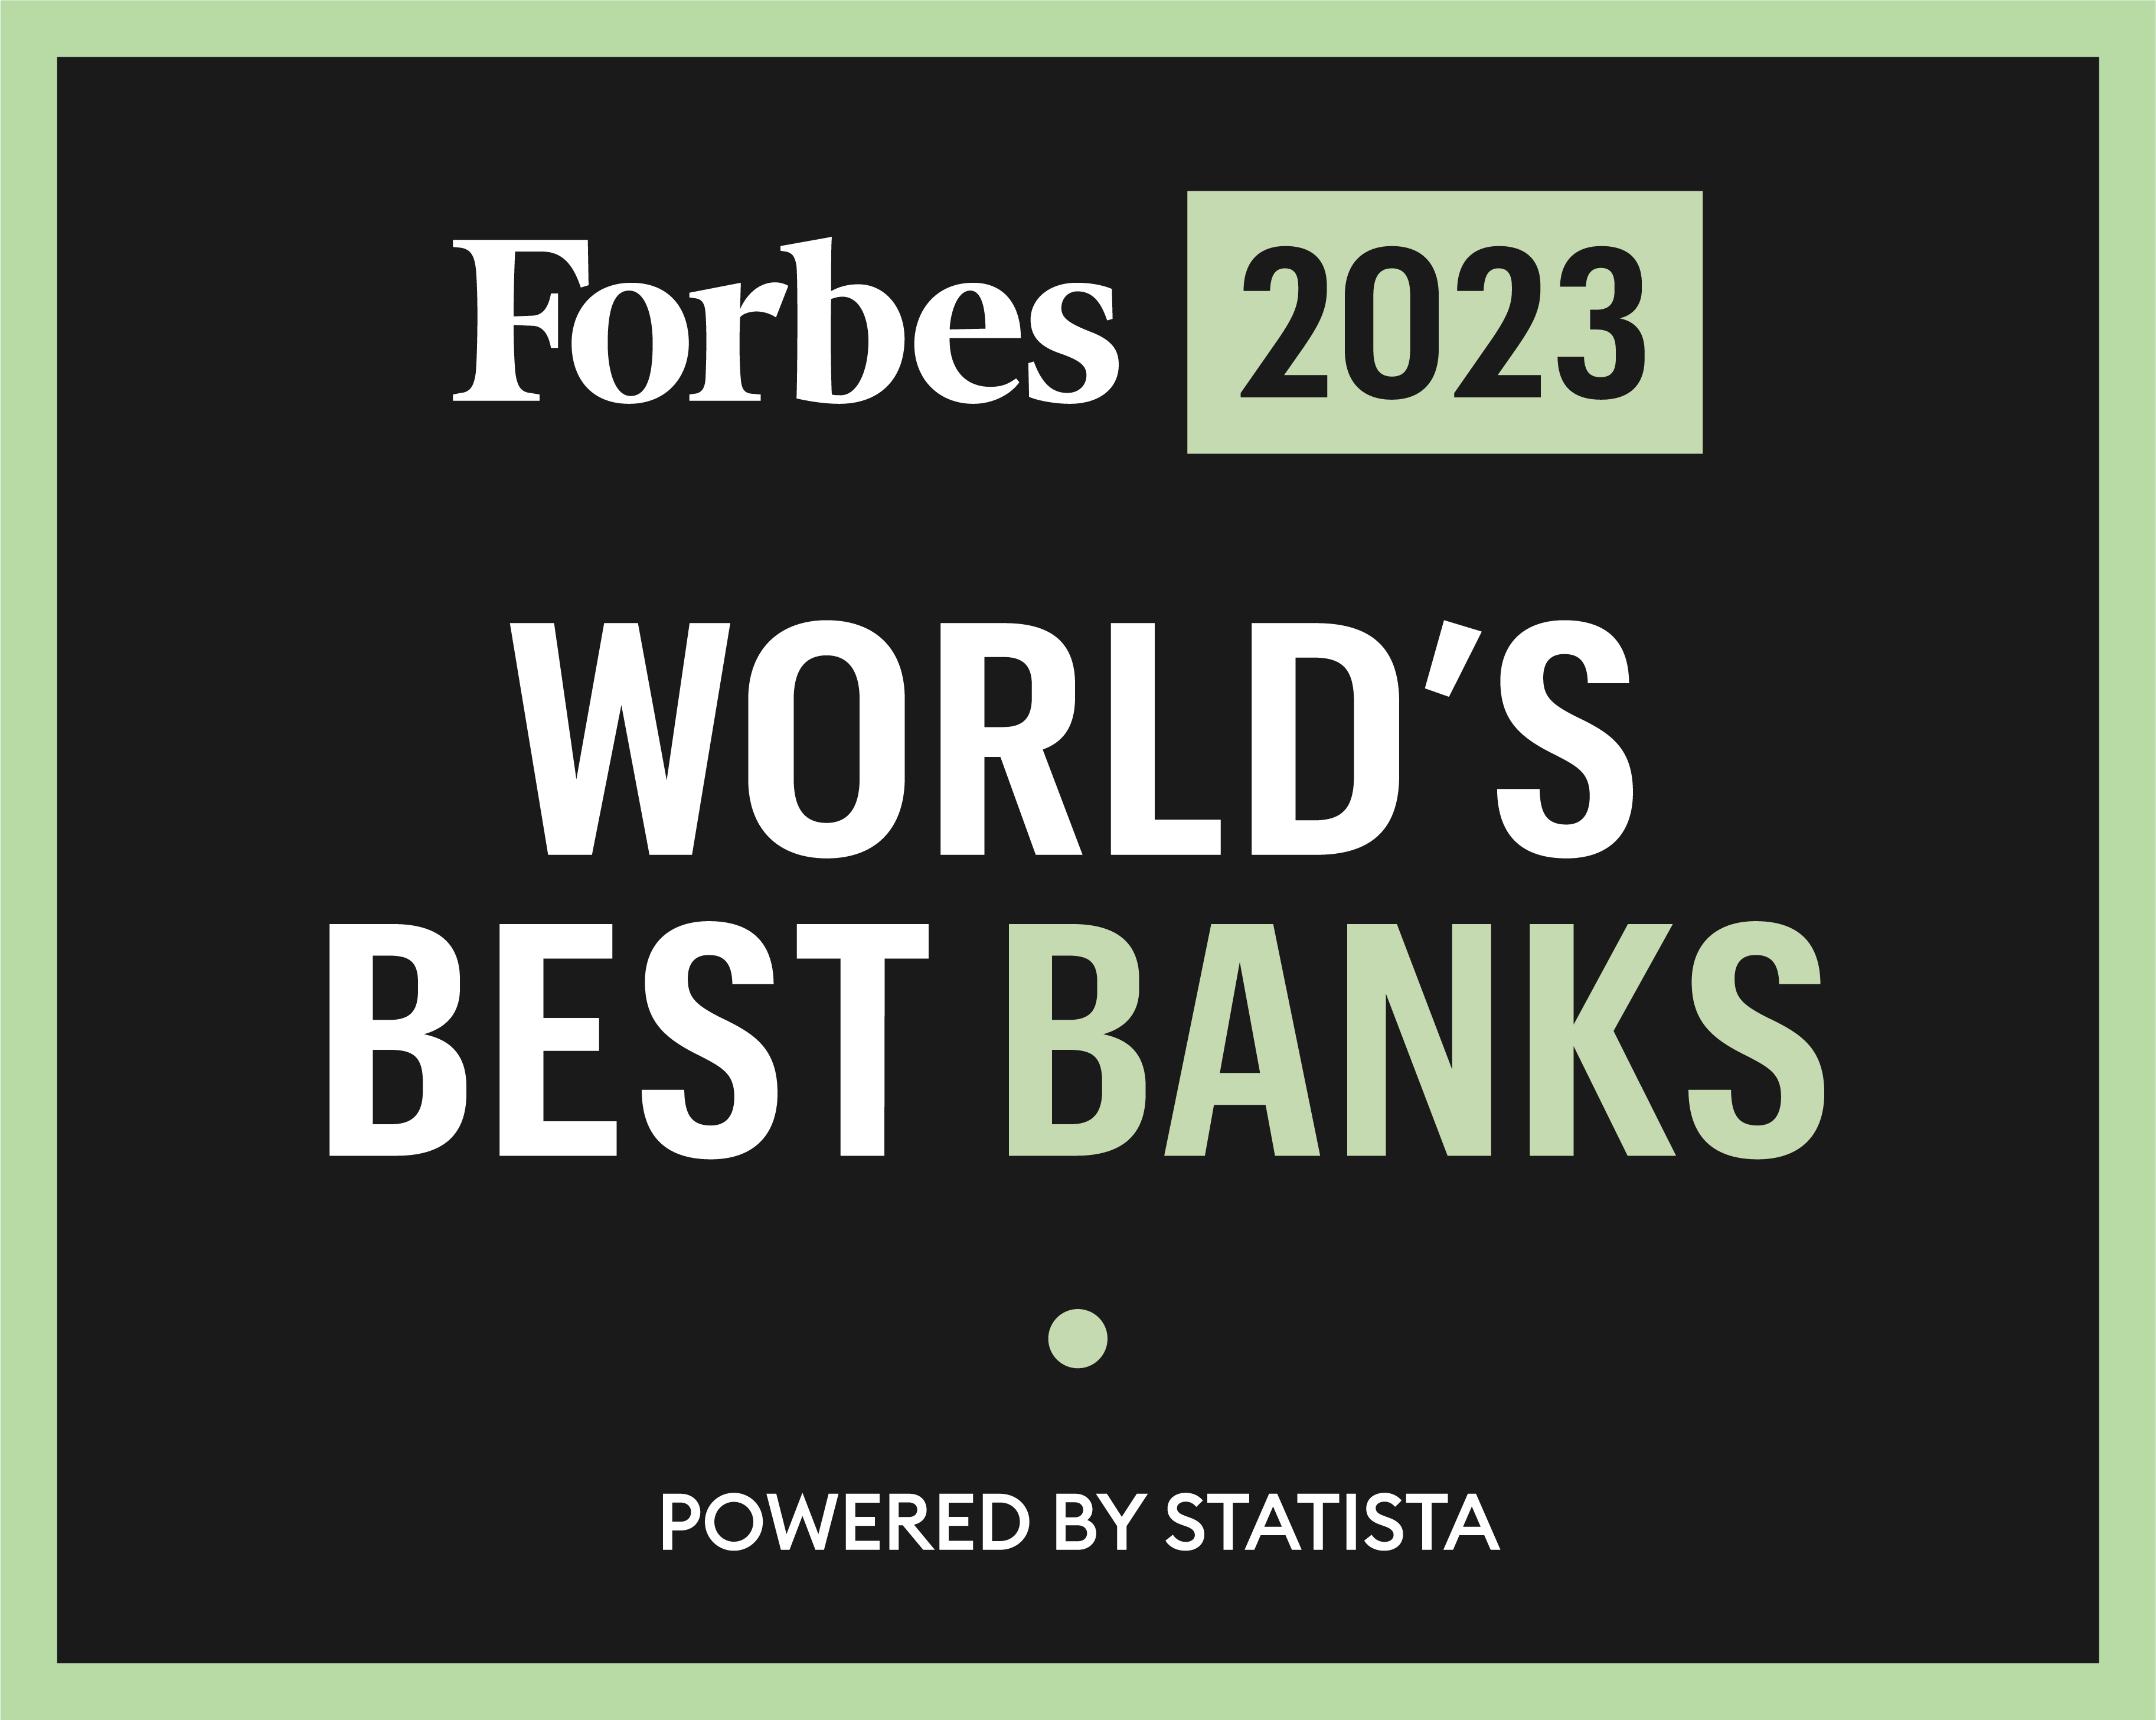 Forbes 2023 World's Best Banks